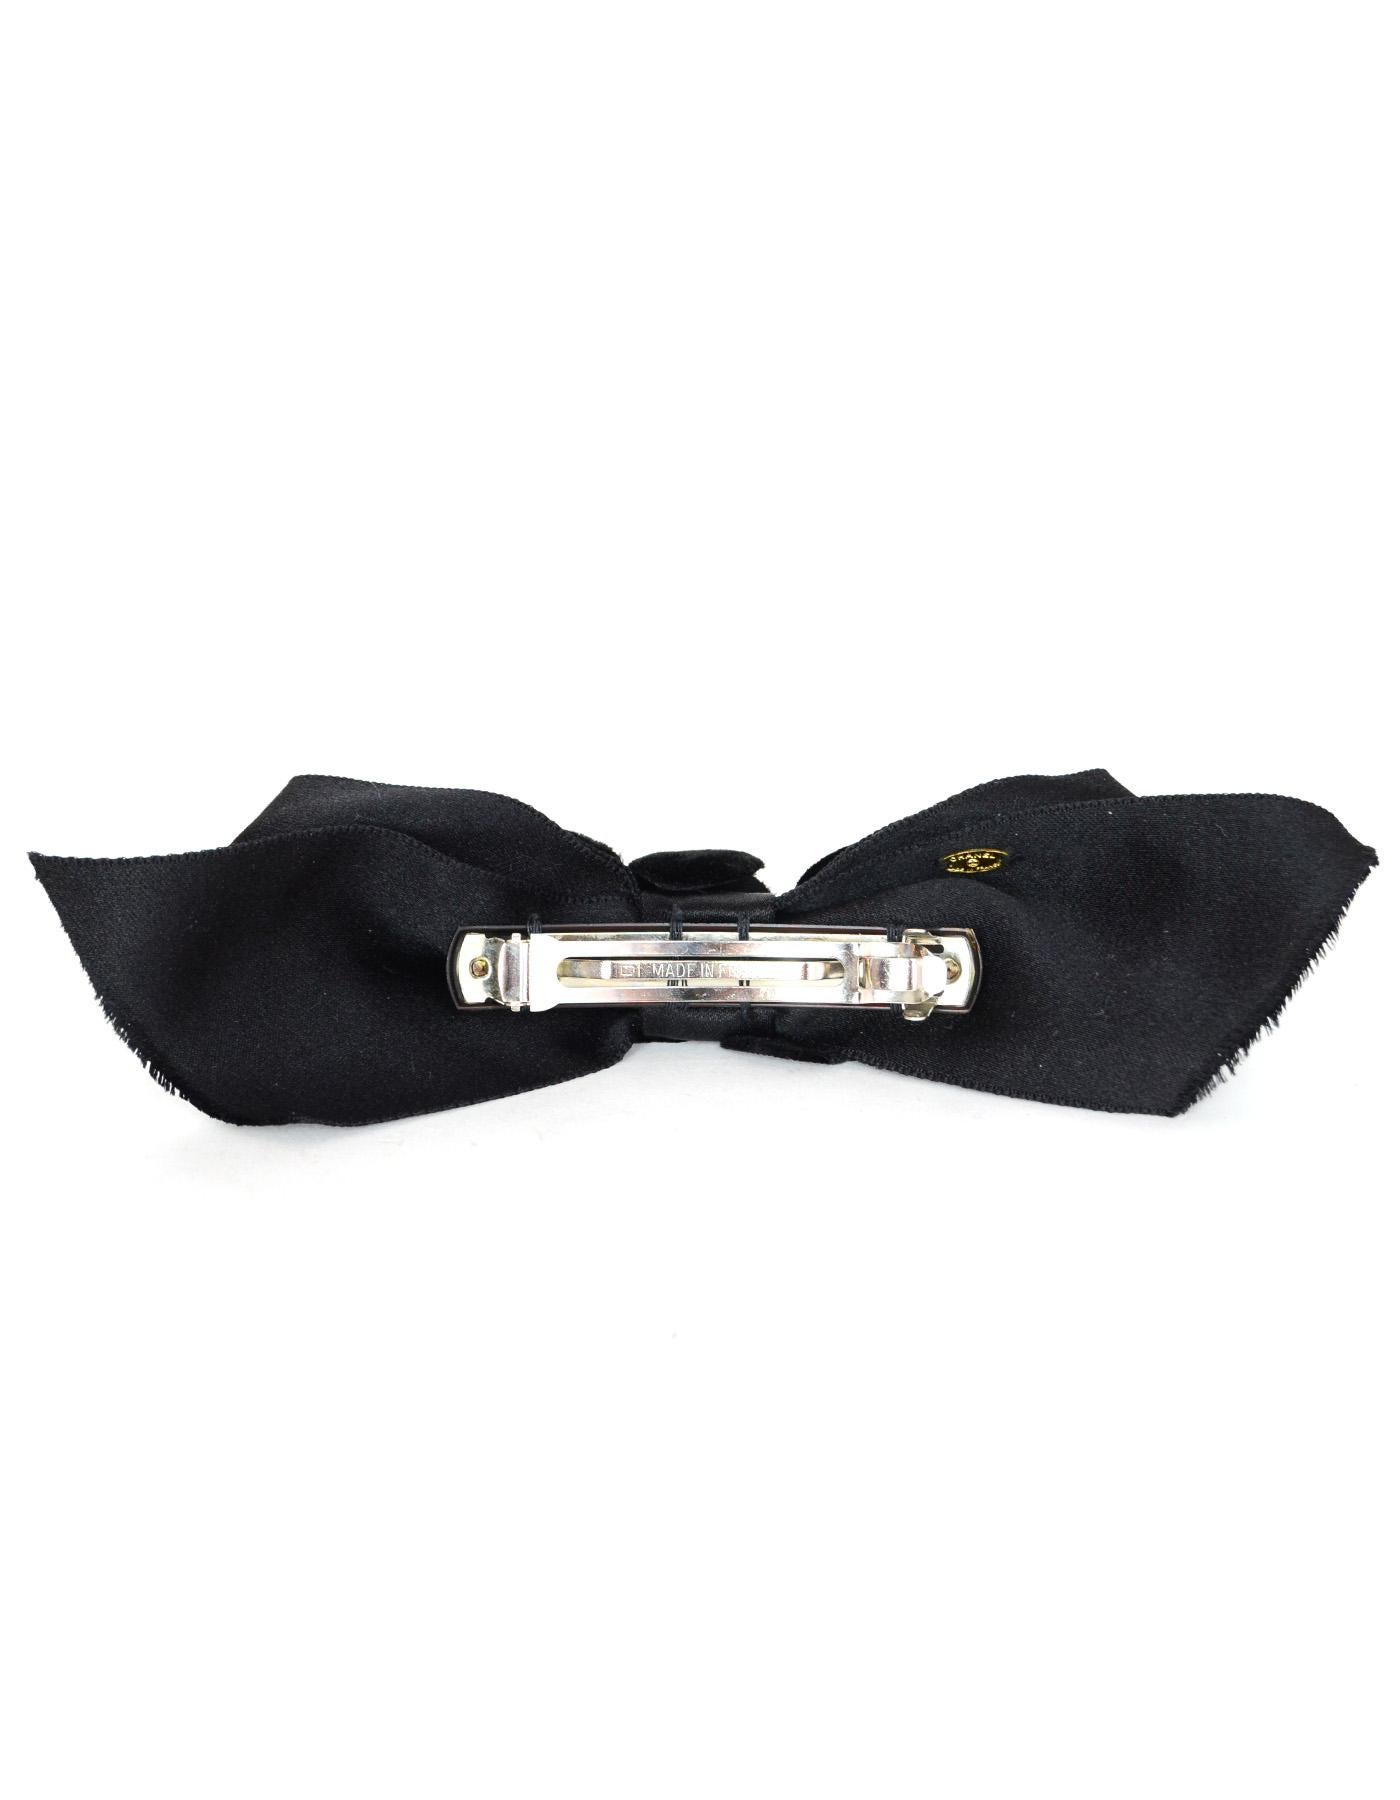 Chanel Black Satin Bow Hair Accessory With Velvet Camelias And Box, Vintage. Featuring Raw Edge On Sides Of Bow And French Clip Closure on Back.

Made In: France
Year of Production: 1990
Color: Black
Hardware: Silvertone hair clip in back
Materials: